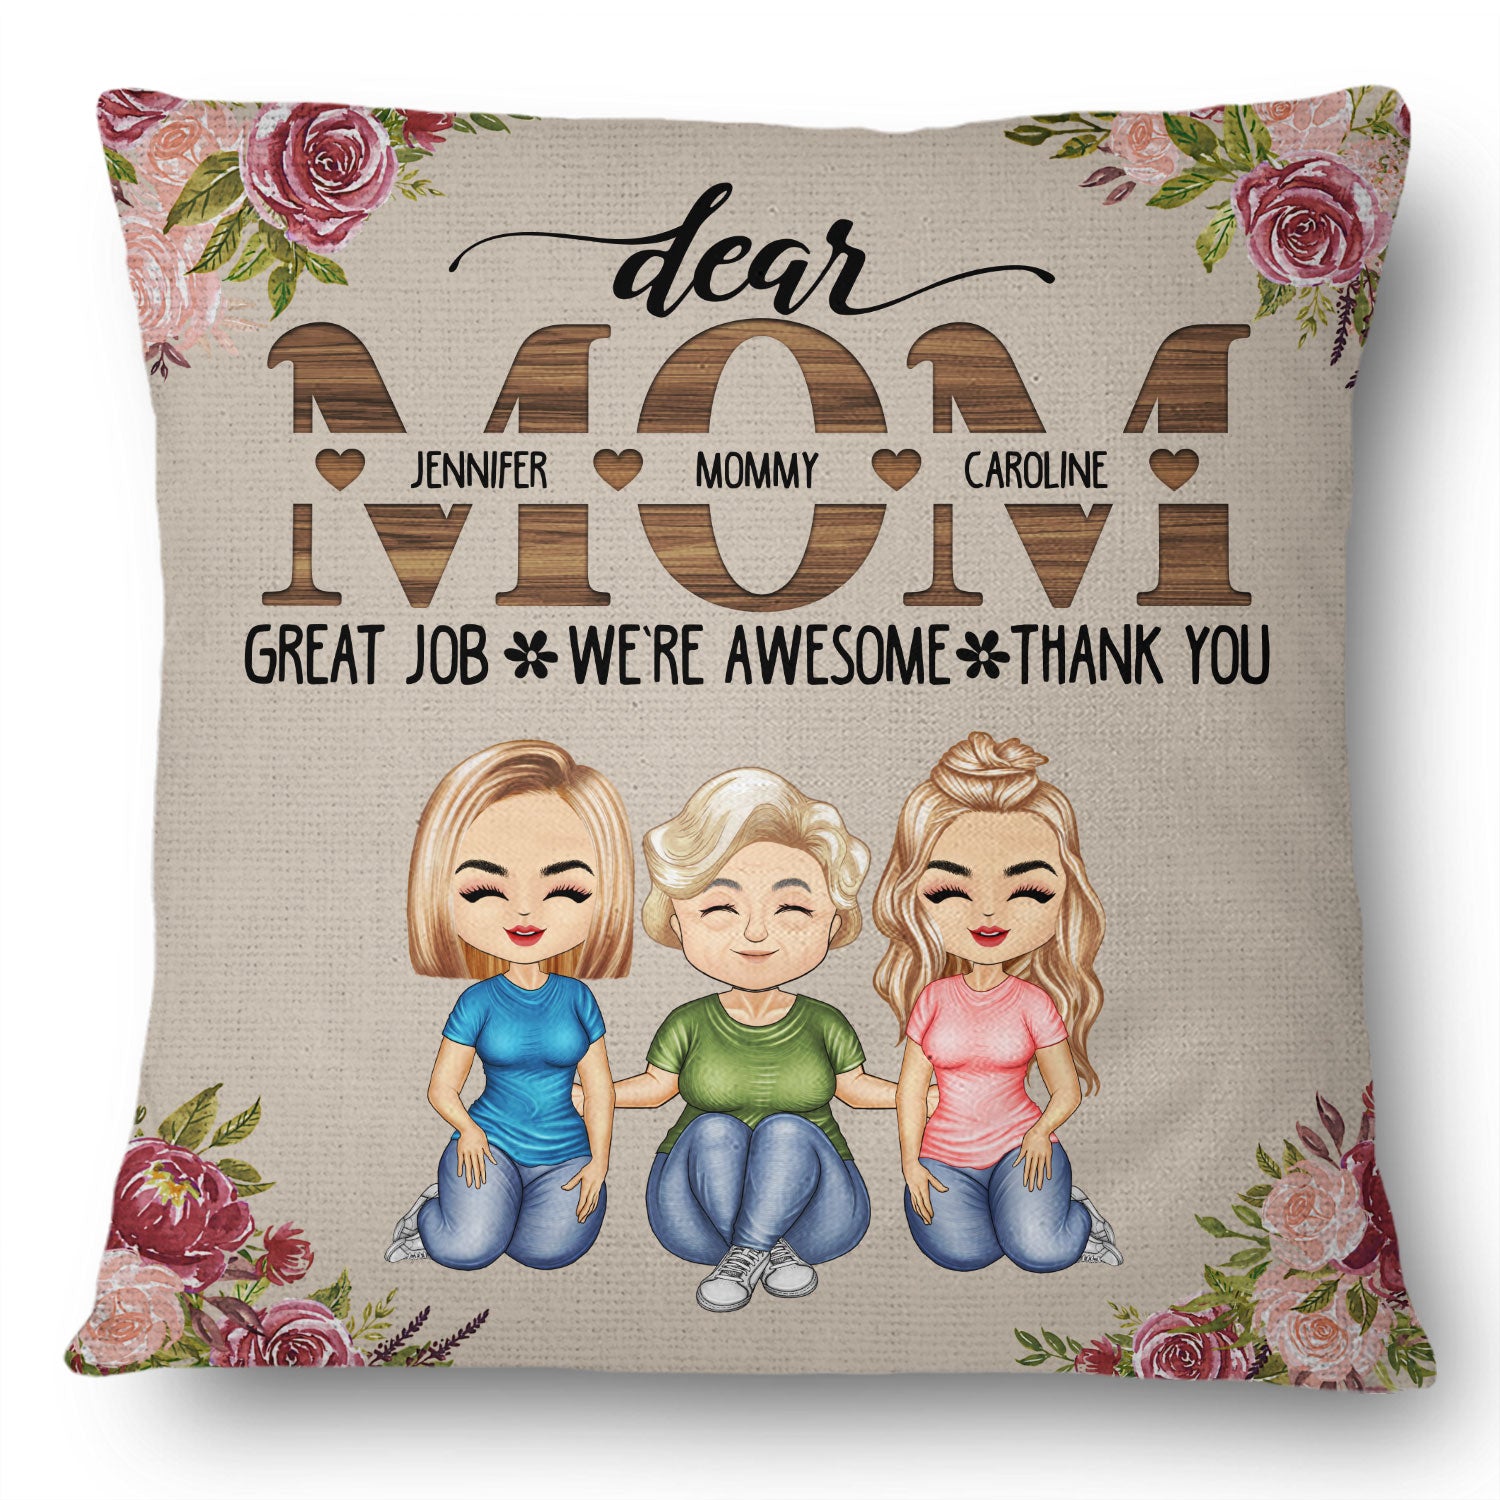 Best Anniversary Gifts for Parents | Anniversary gifts for parents, Best  anniversary gifts, 30th anniversary gifts for parents